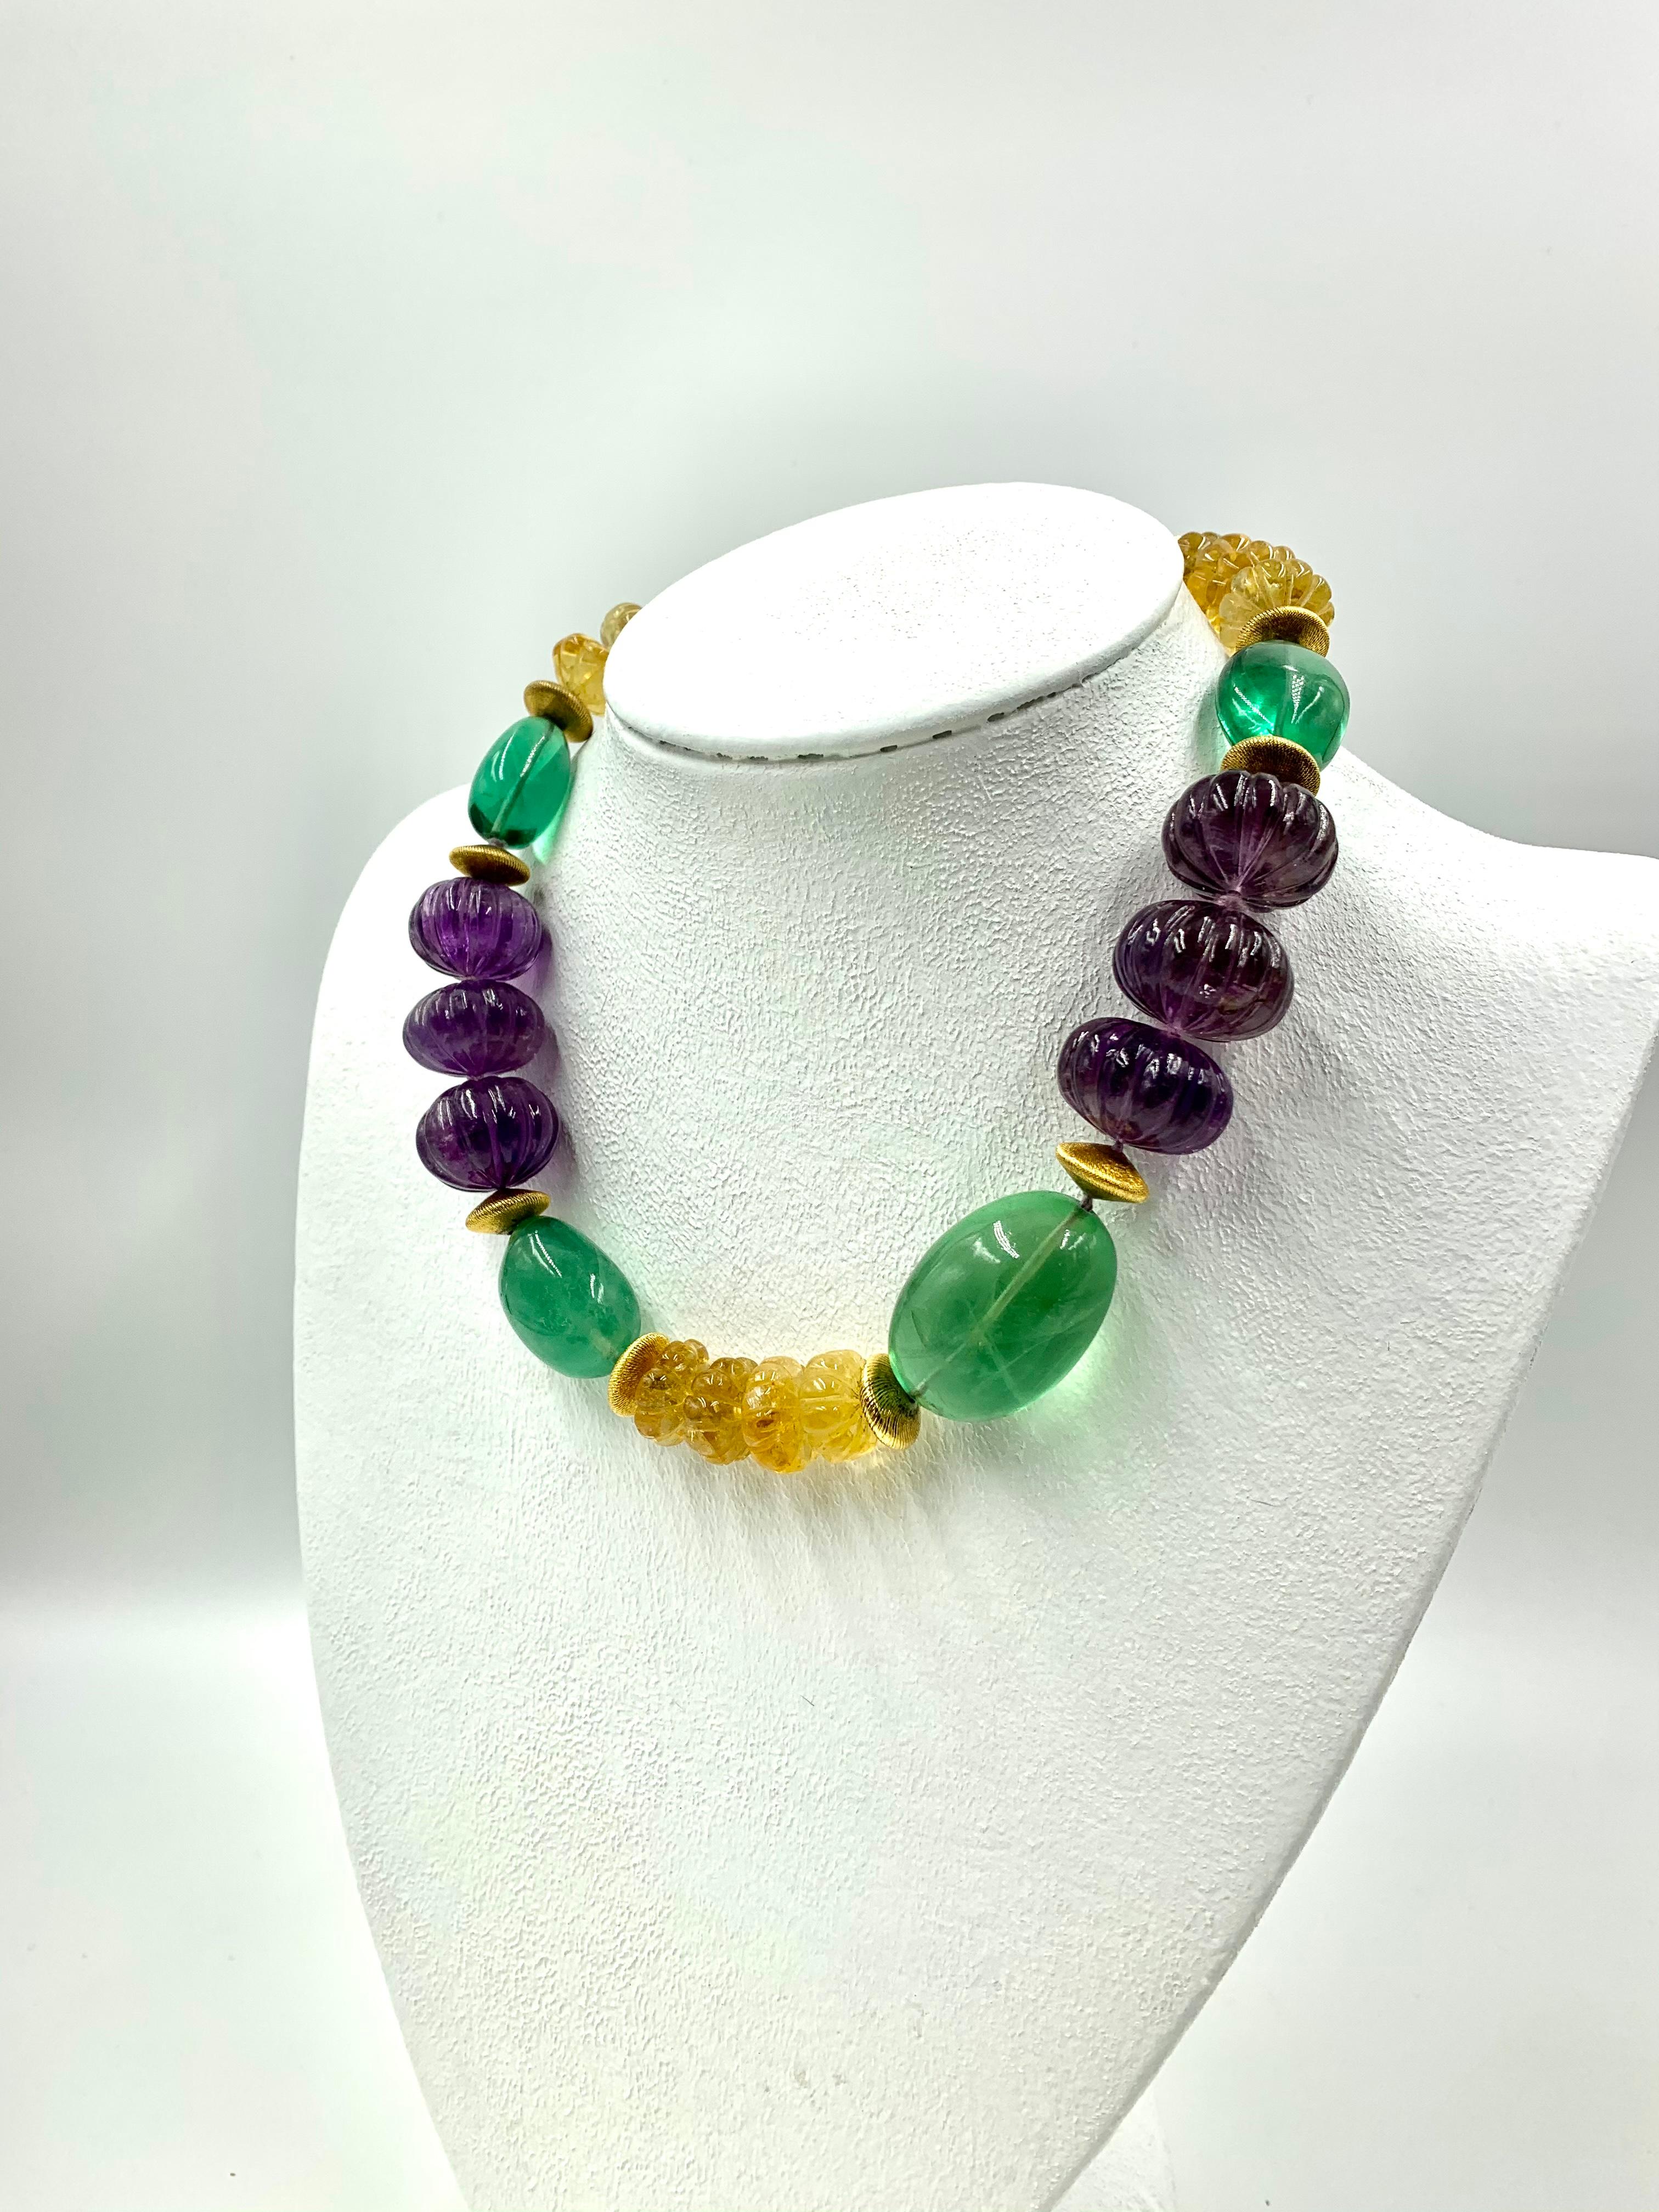 Vintage Iradj Moini Amethyst, Citrine, Fluorite and Gold-Plated Bead Necklace 5